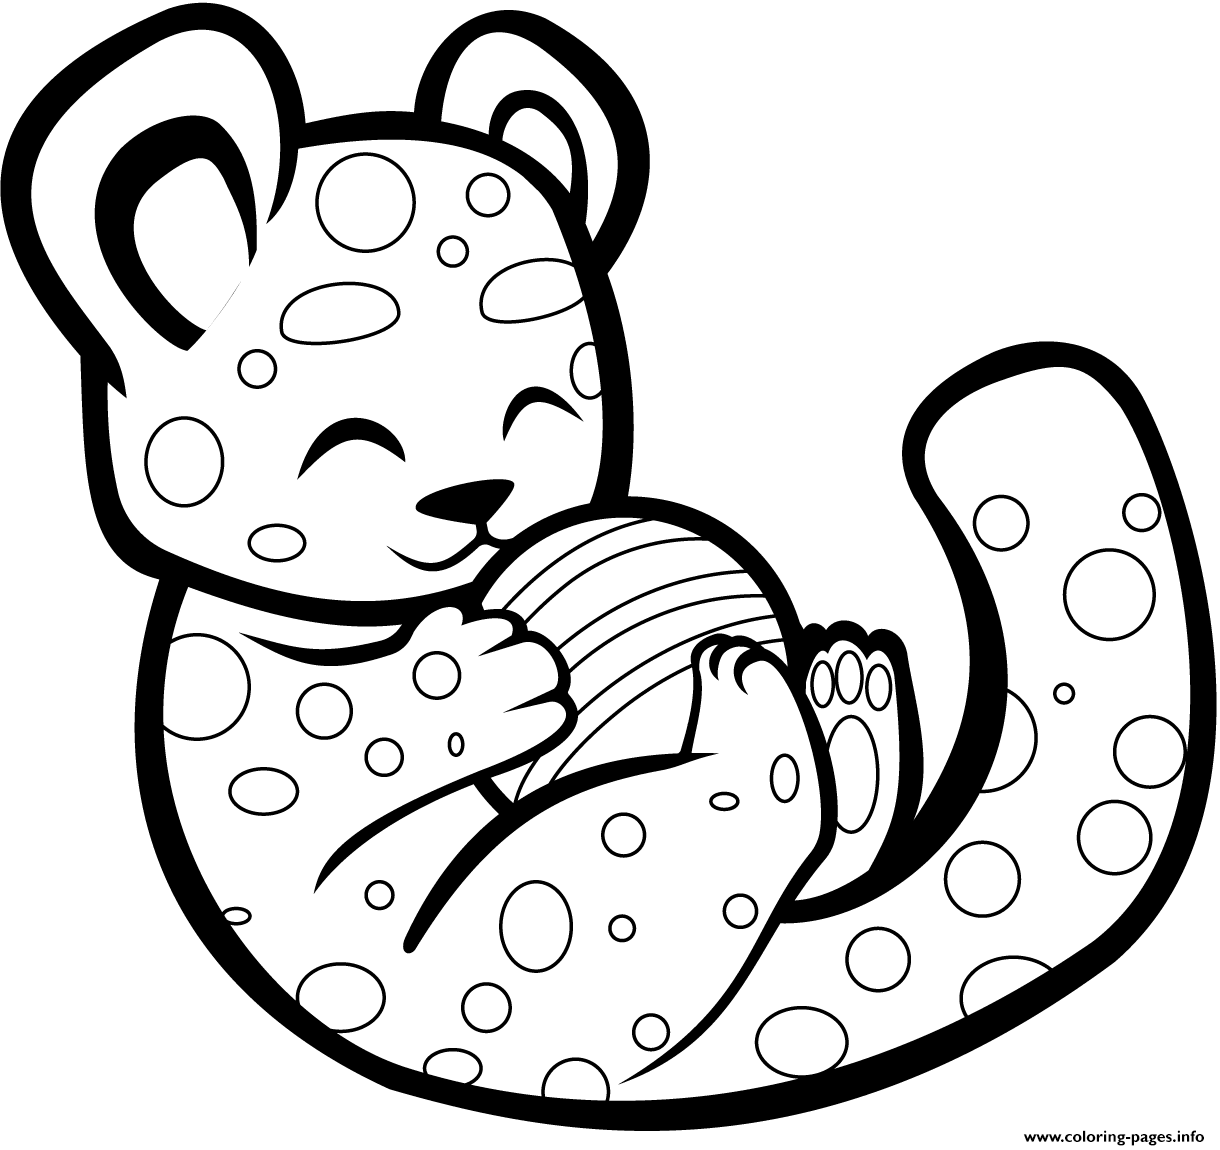 Cute cheetah playing with a ball coloring page printable